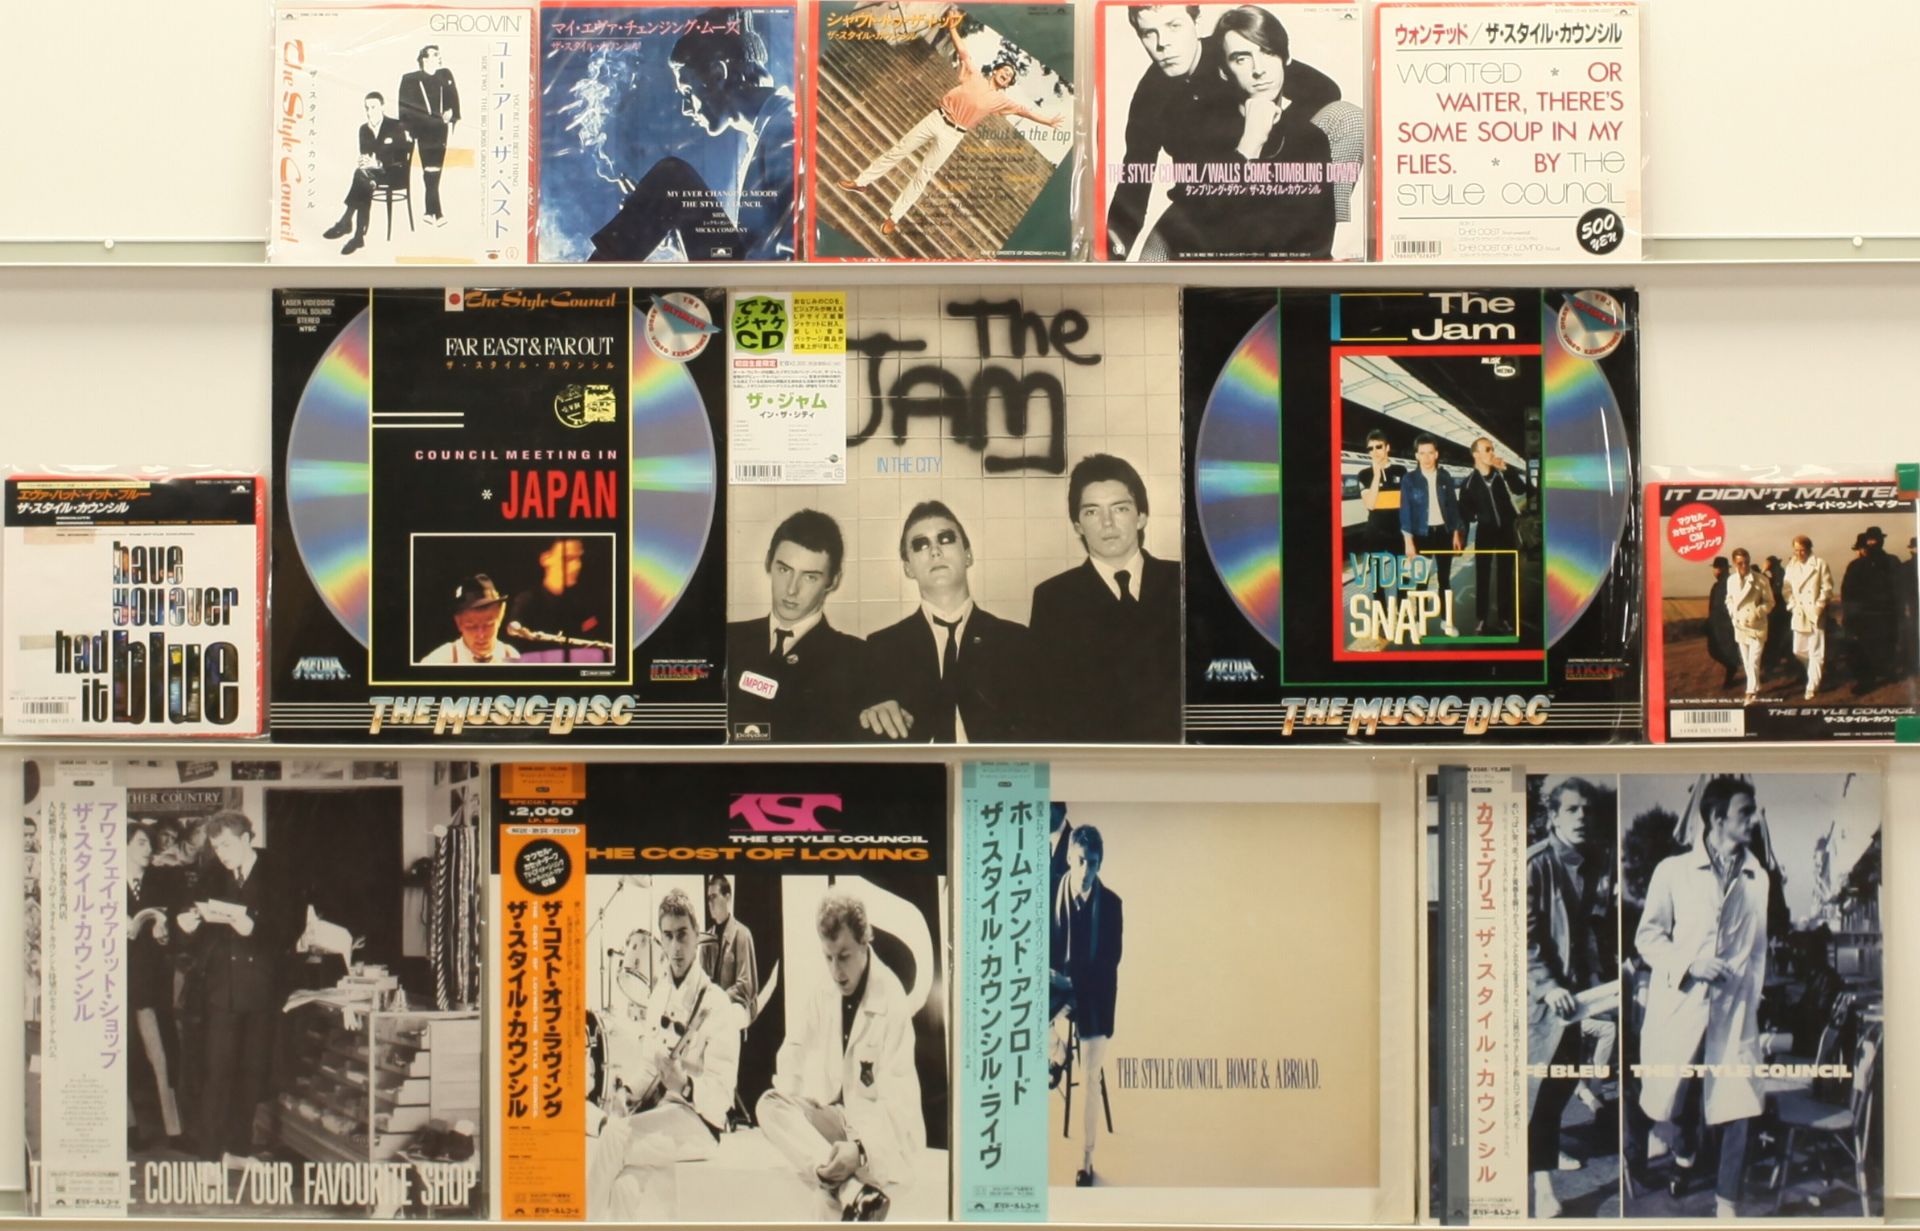 The Jam/Style Council Japanese LPs, 7" Singles and Laser Discs